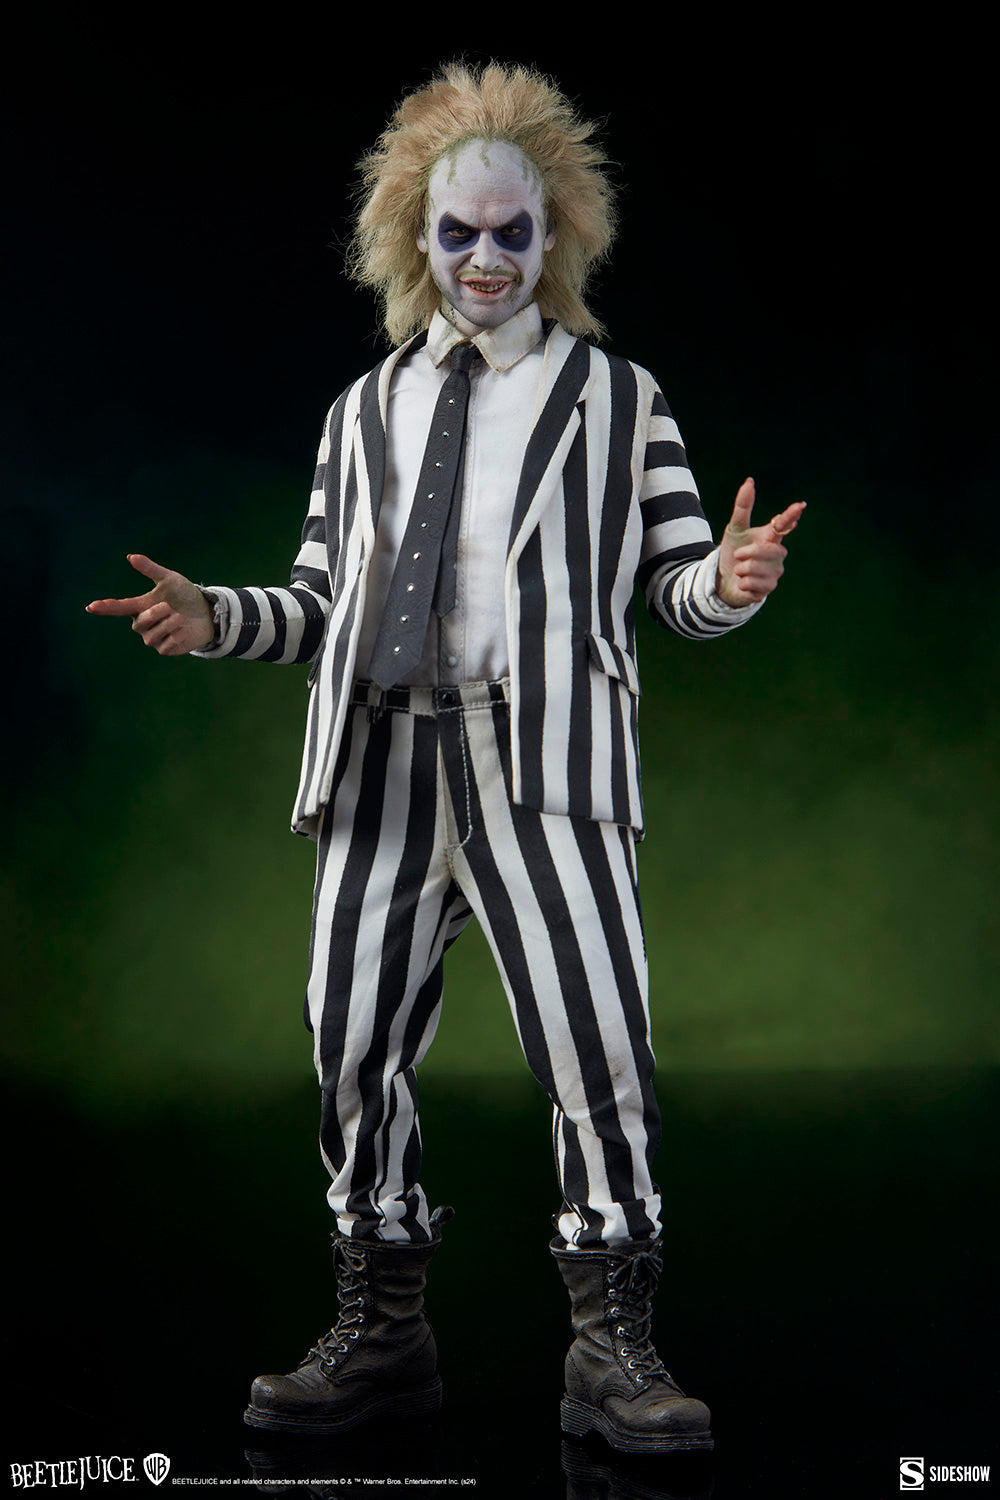 Beetlejuice Sixth Scale Figure by Sideshow Collectibles